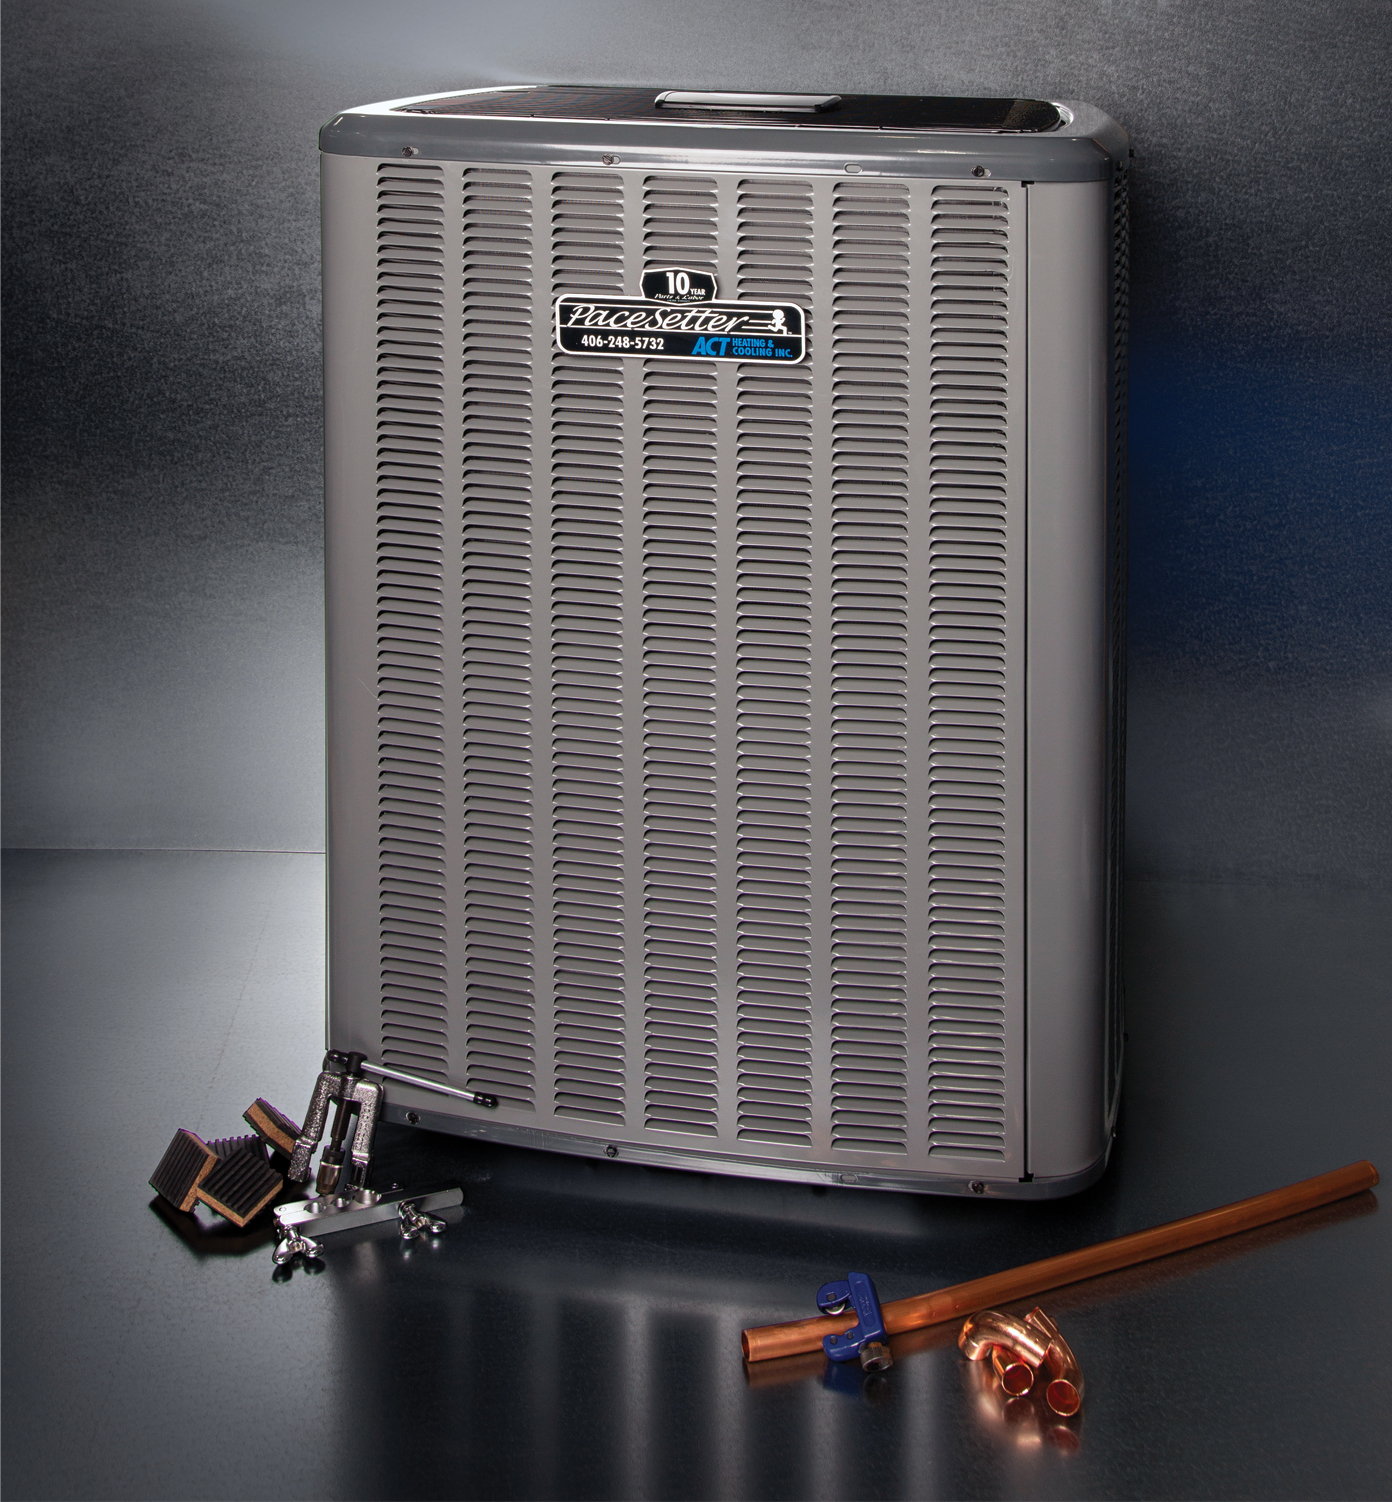 ACT Heating & Cooling uses PaceSetter Air Conditioners